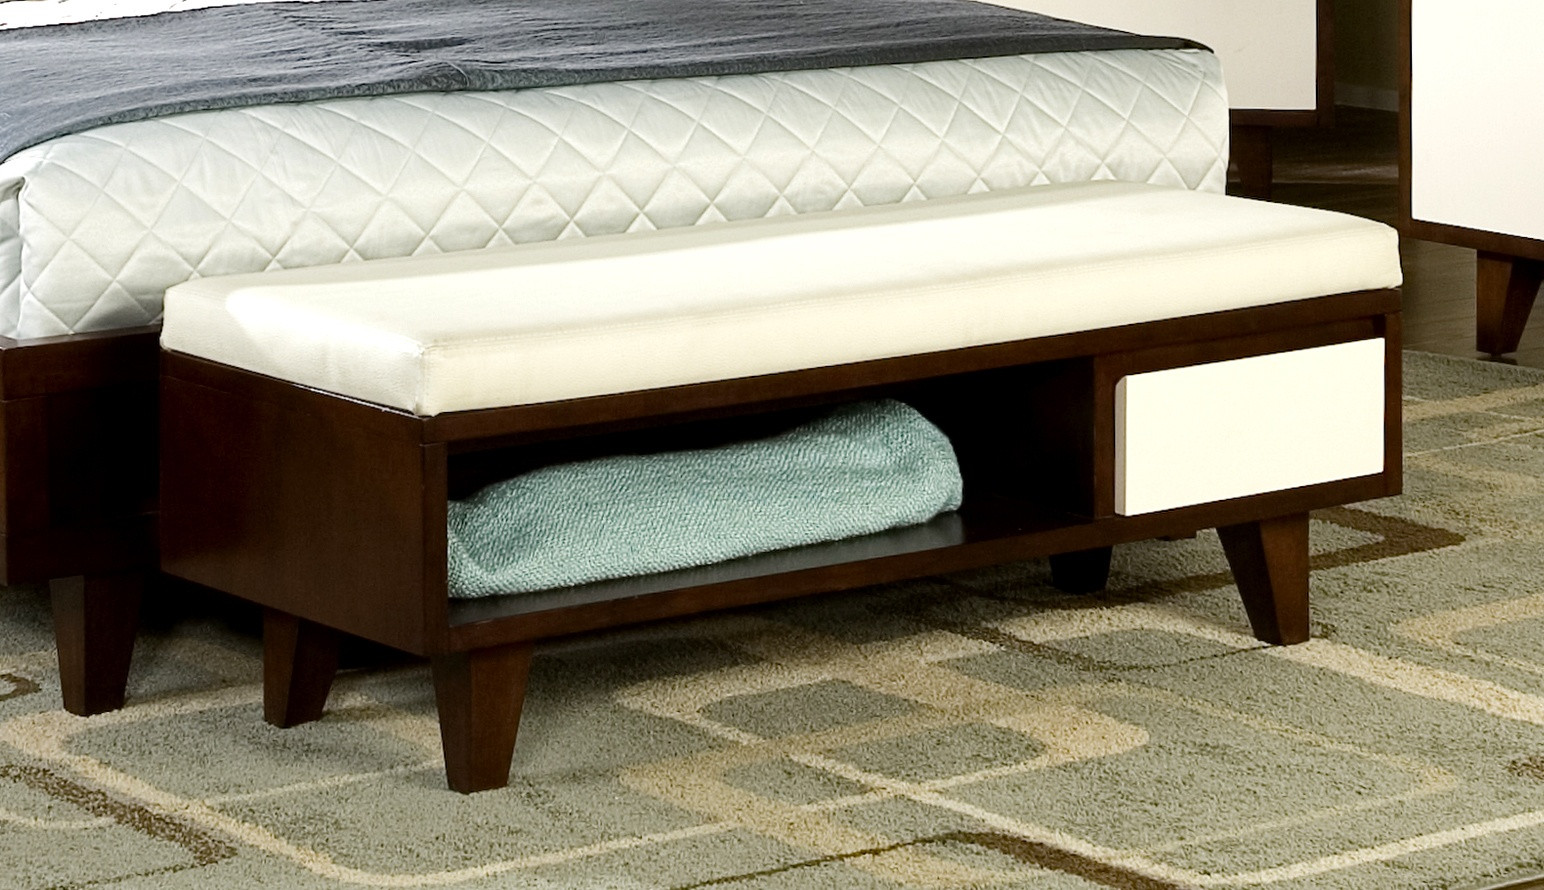 Storage Bed Benches
 Bedroom Benches with Storage Ideas – HomesFeed